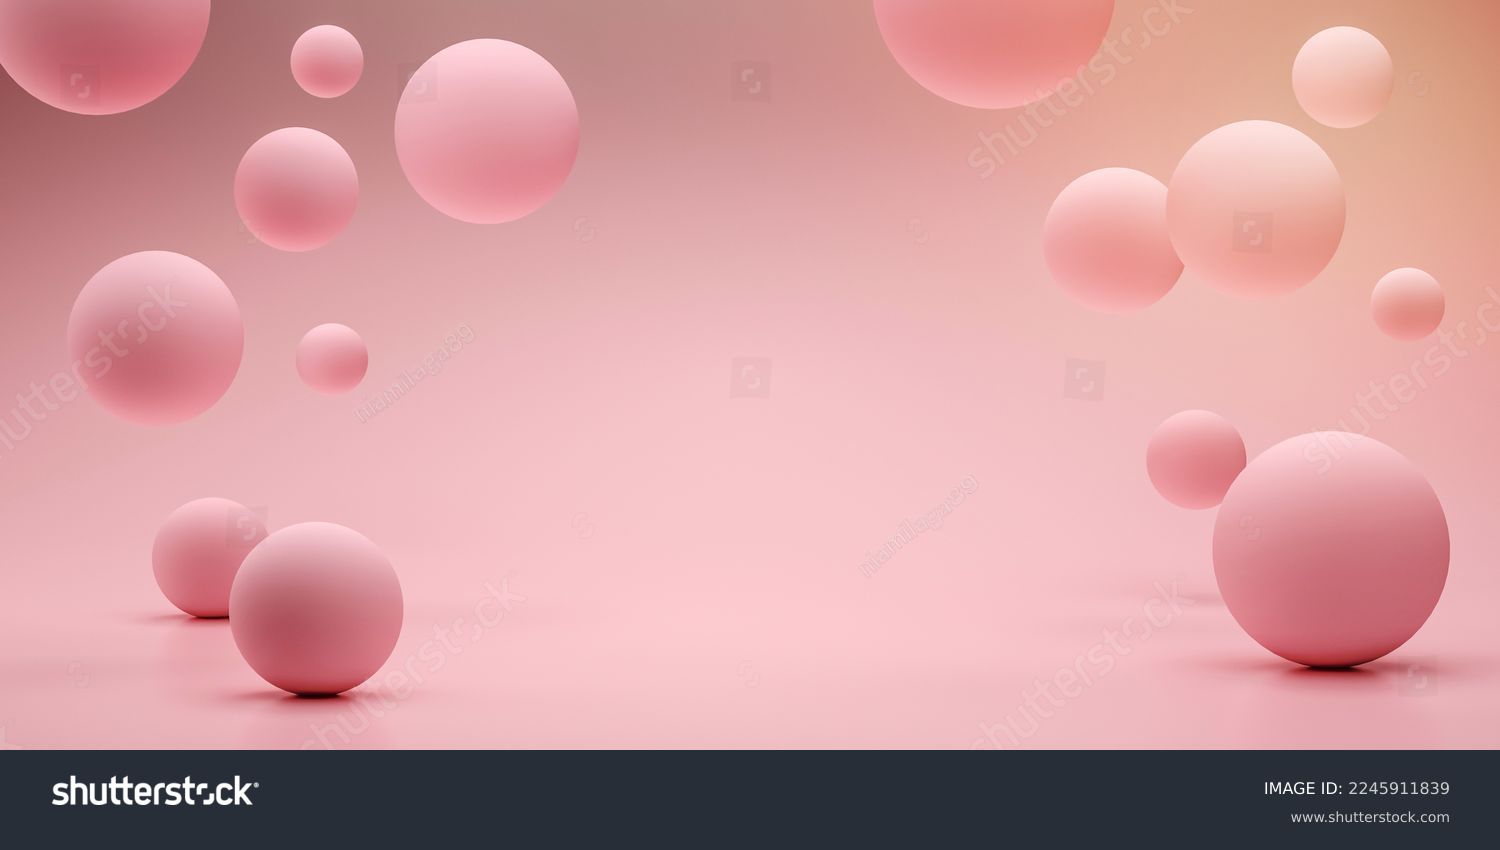 Floating spheres 3d rendering empty space for product show #2245911839